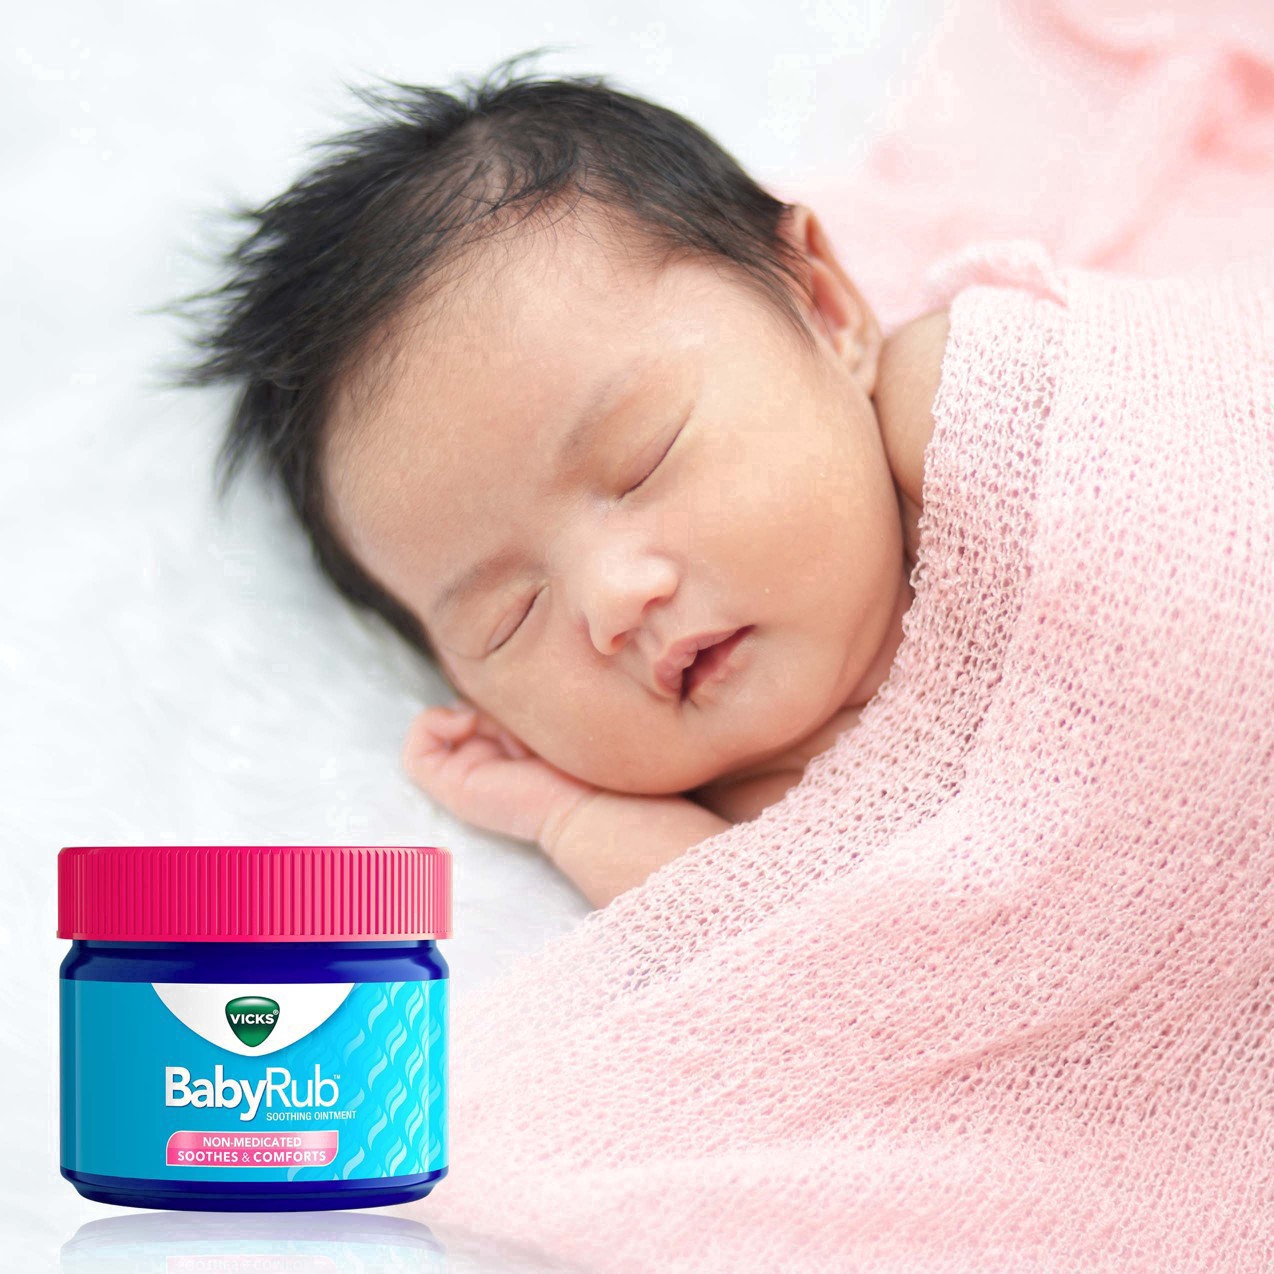 slide 47 of 78, Vicks BabyRub, Chest Rub Ointment with Soothing Aloe, Eucalyptus, Lavender, and Rosemary, from The Makers of VapoRub, 1.76 oz, 1.76 oz